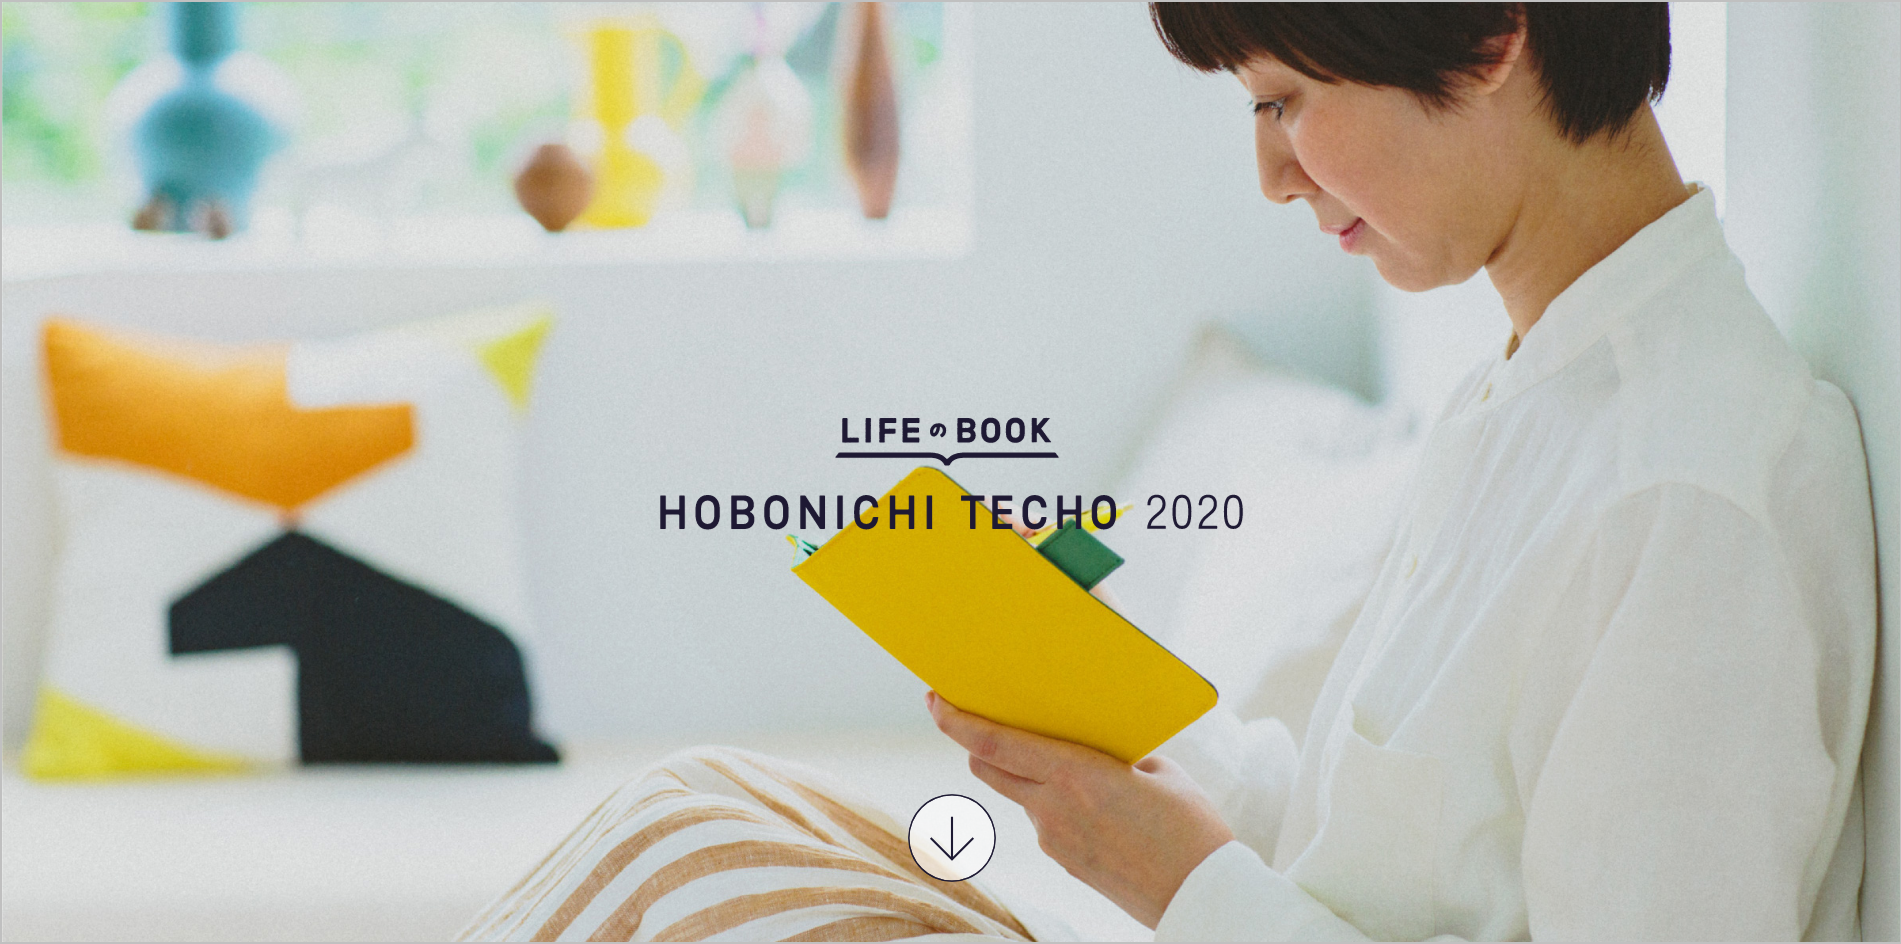 hobonichi techno landing page missing navigation elements examples